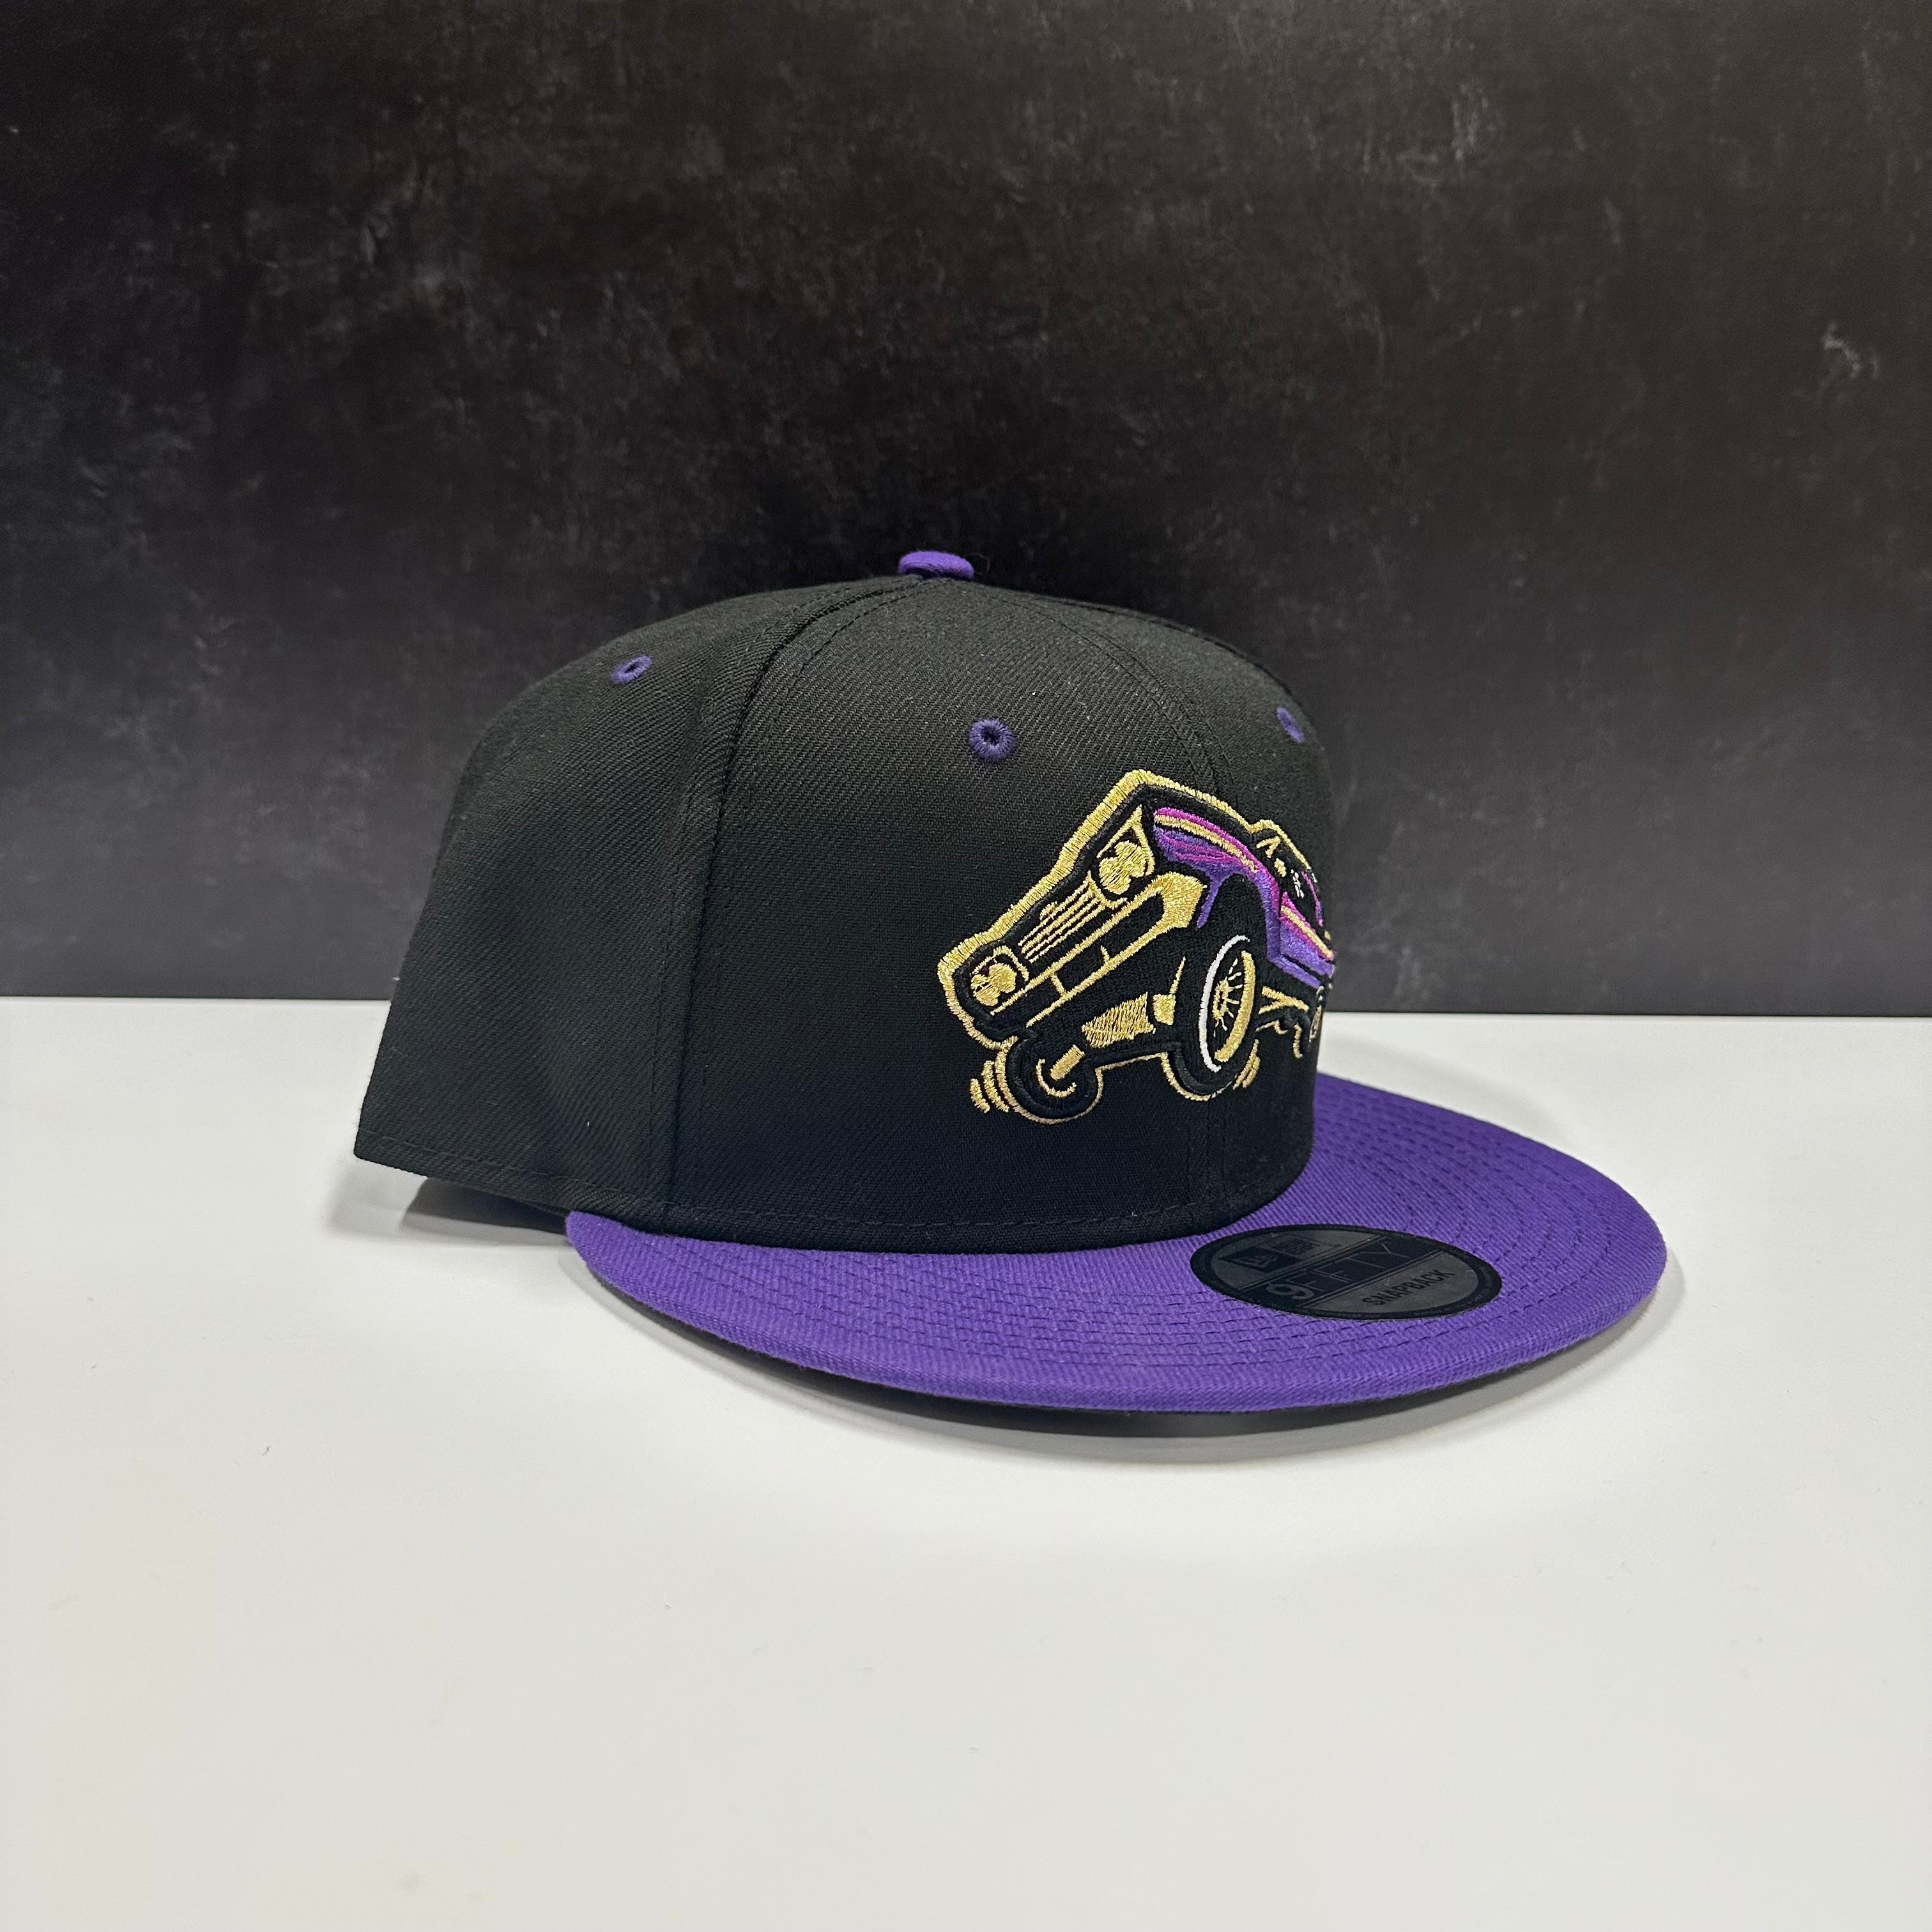 Black/Purple Lowrider Snapback – Fresno Grizzlies Official Store